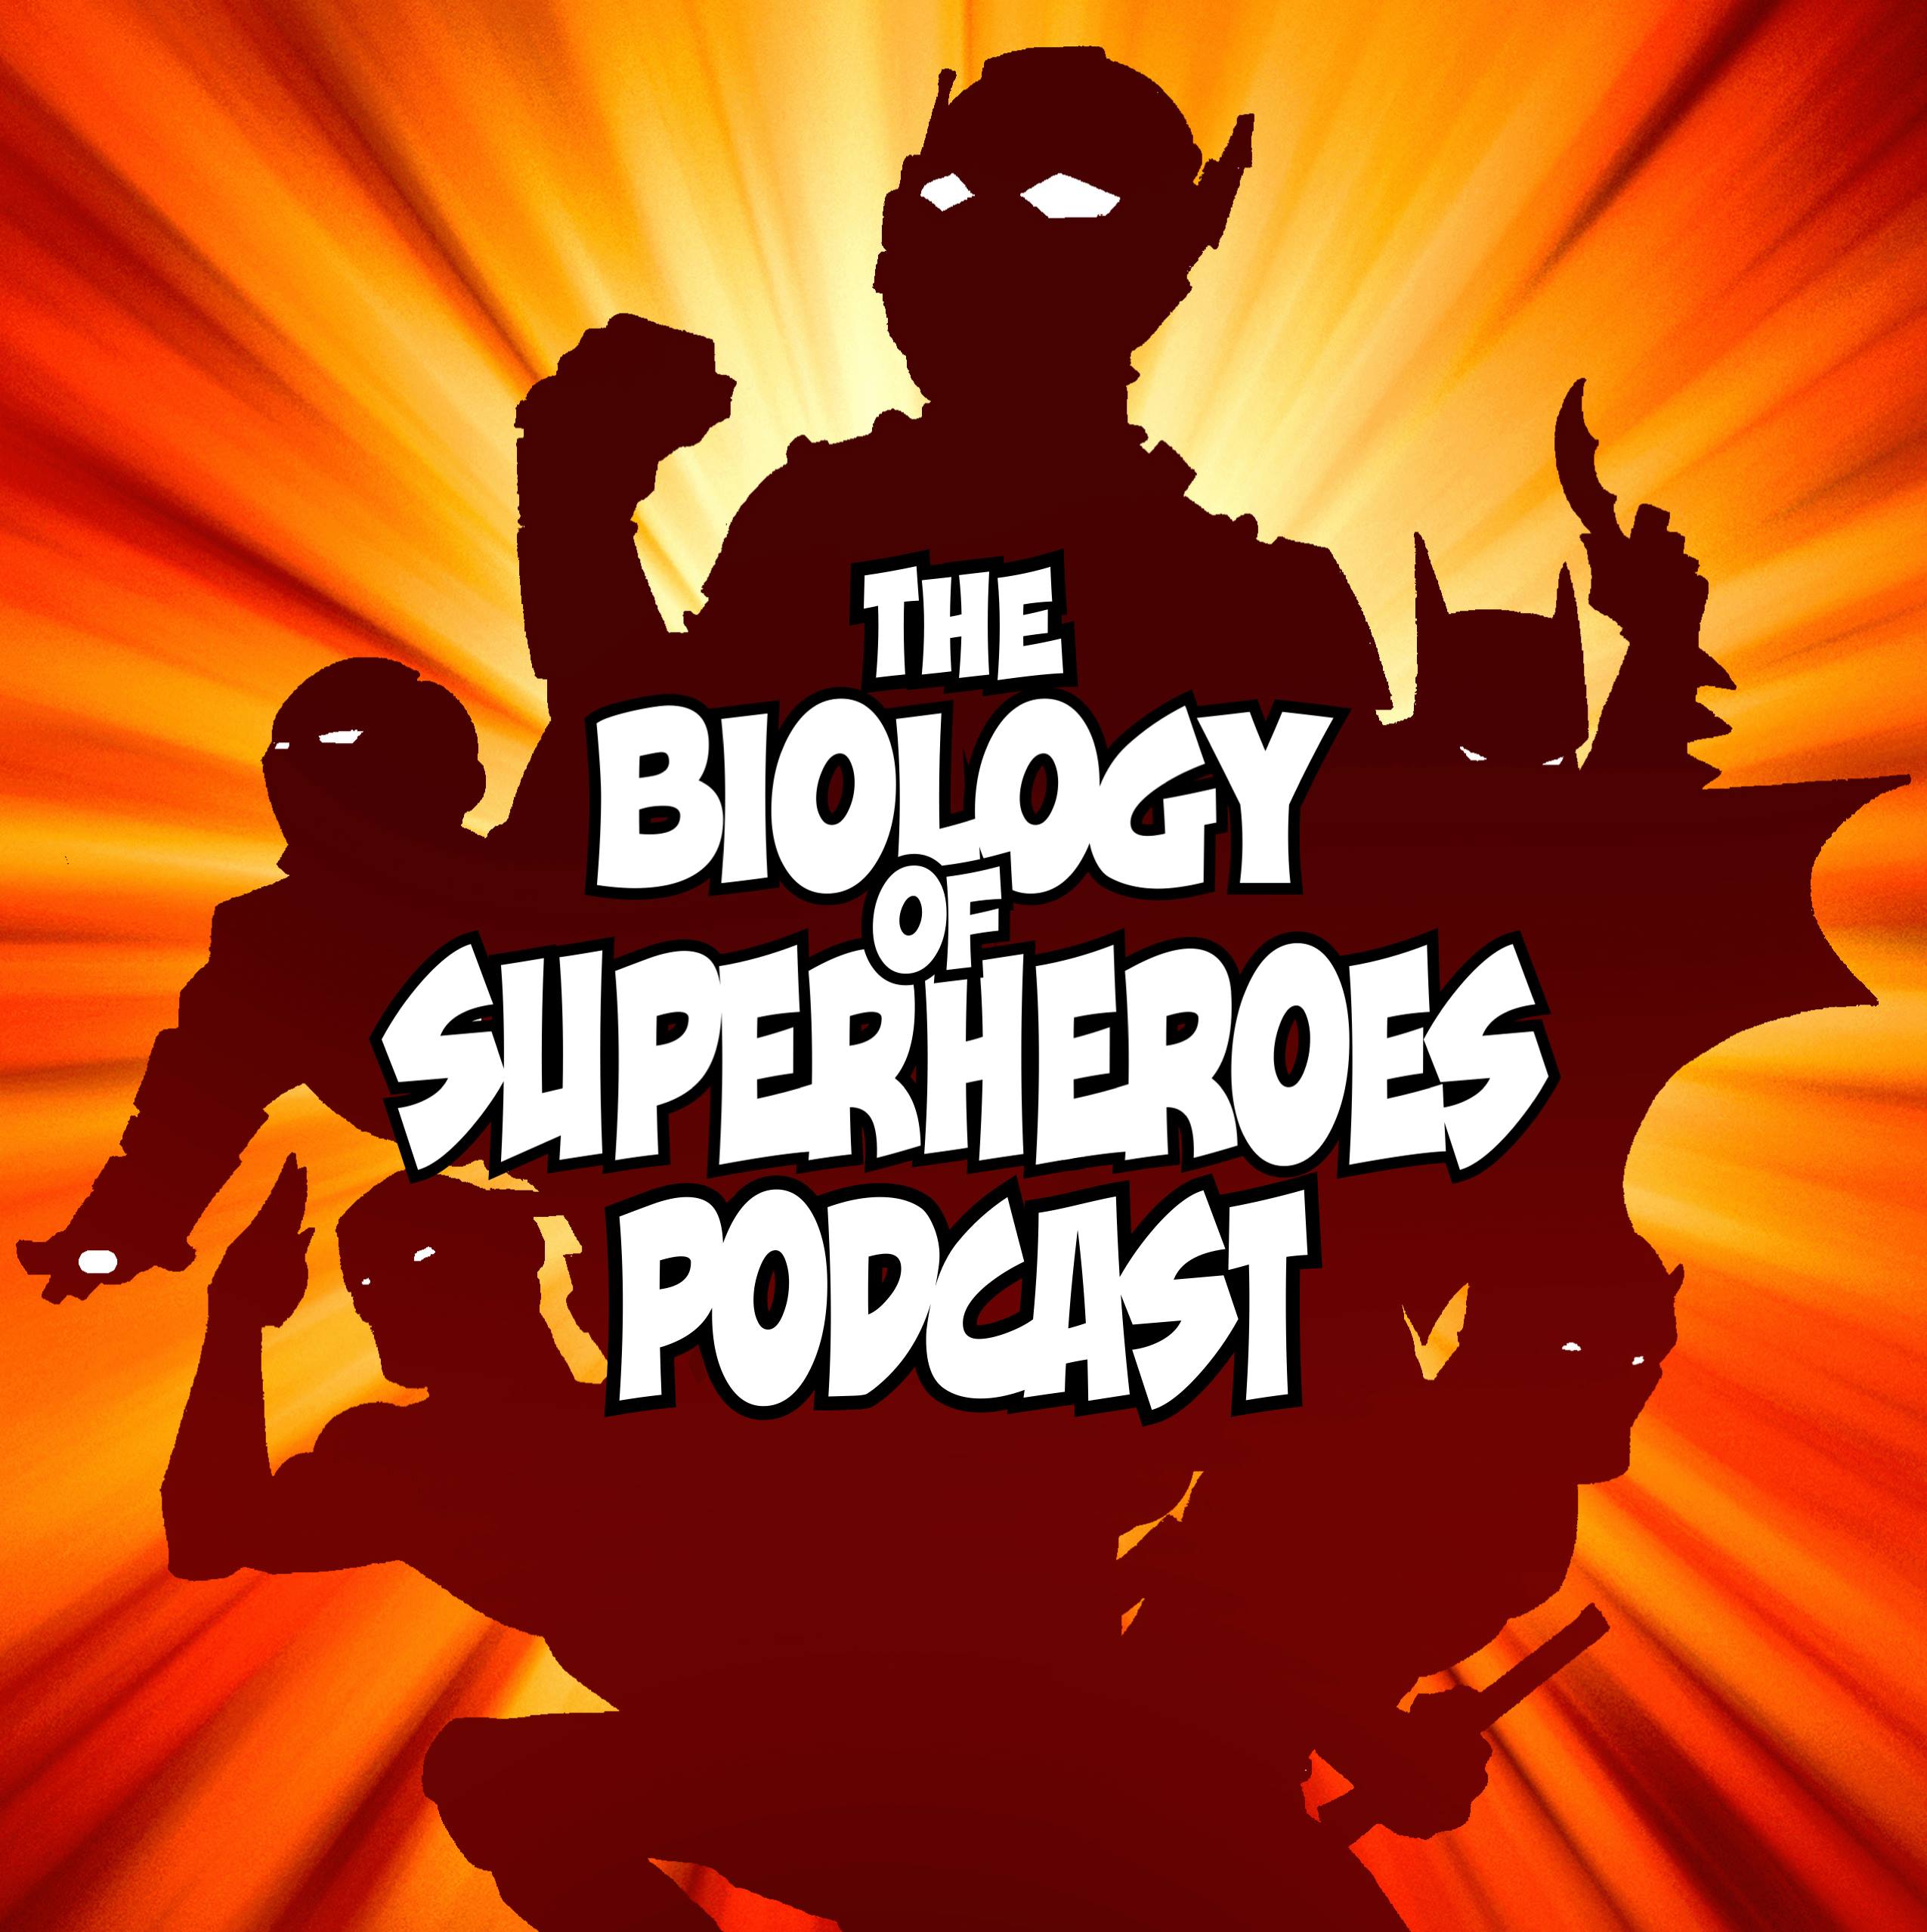 Episode 1: Spiderman (Part 1)- Bioprospecting and the Biology of Silk